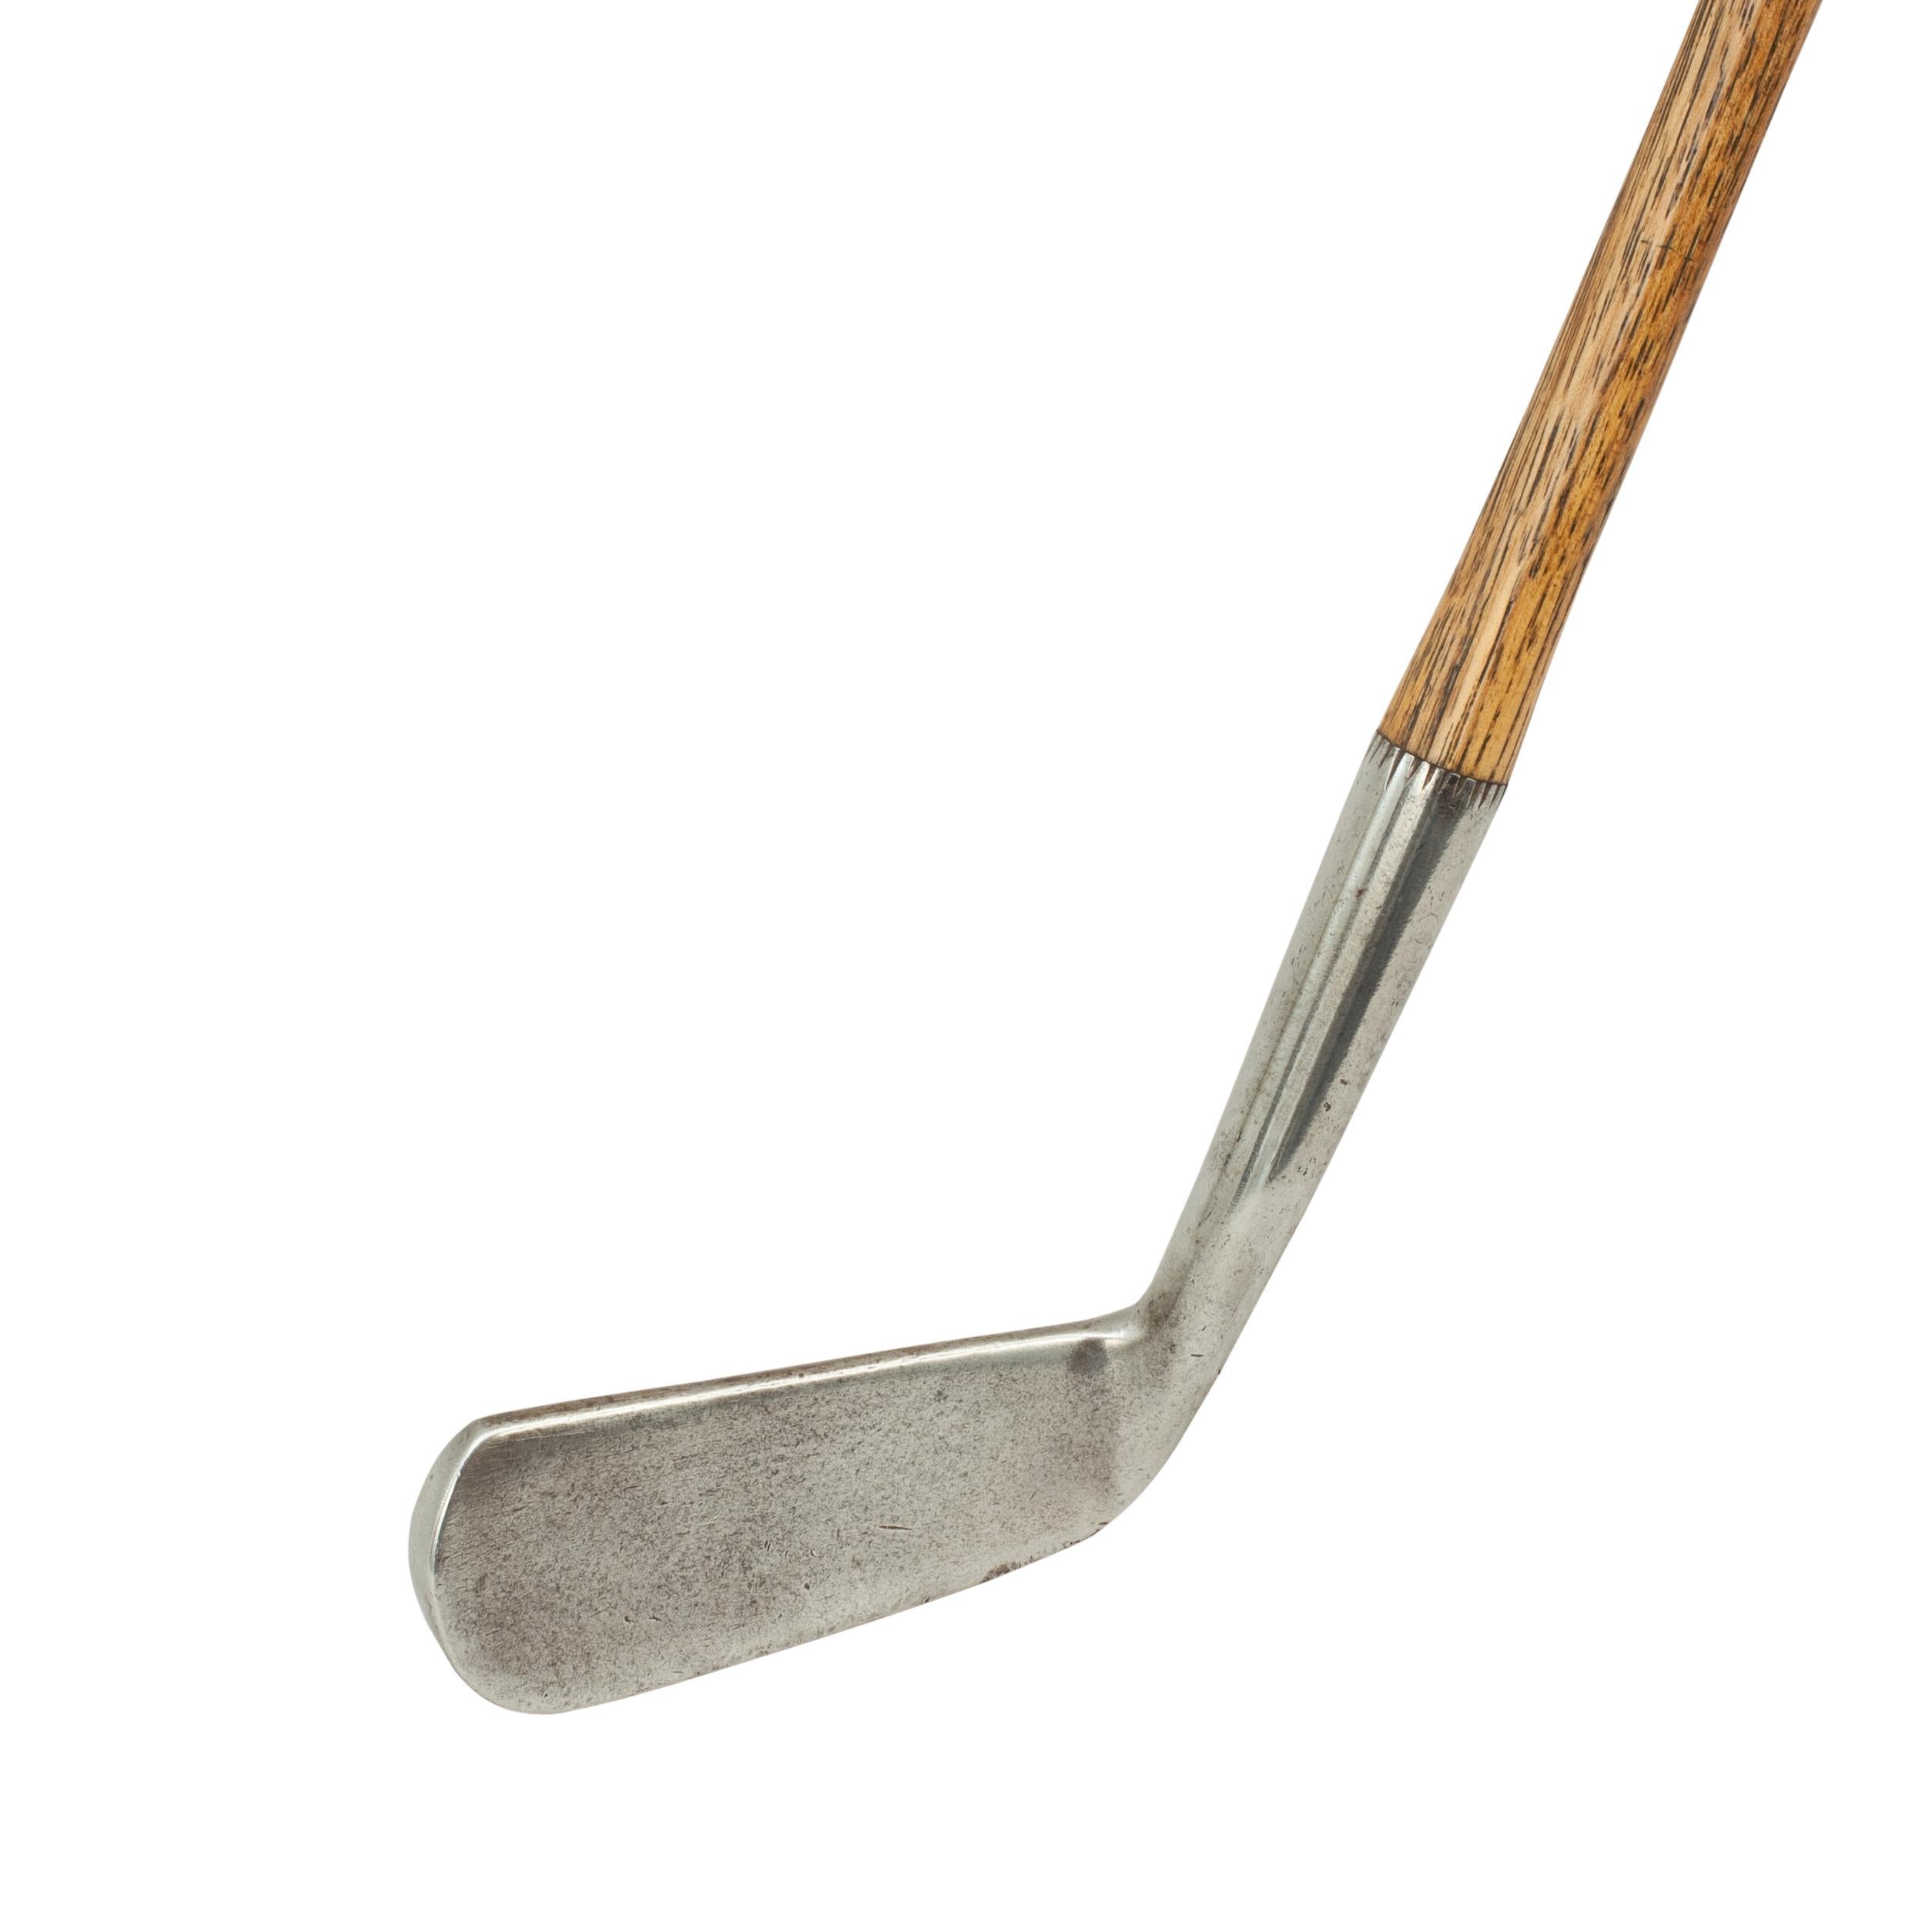 Vintage Hickory Golf Club, Wry Neck Putter, by Tom Stewart, St Andrews.
A fine and nicely weighted smooth faced offset putter by Tom Stewart of St. Andrews. Hickory shafted with polished leather grip. On the rear of the club head is the 'PIPE'